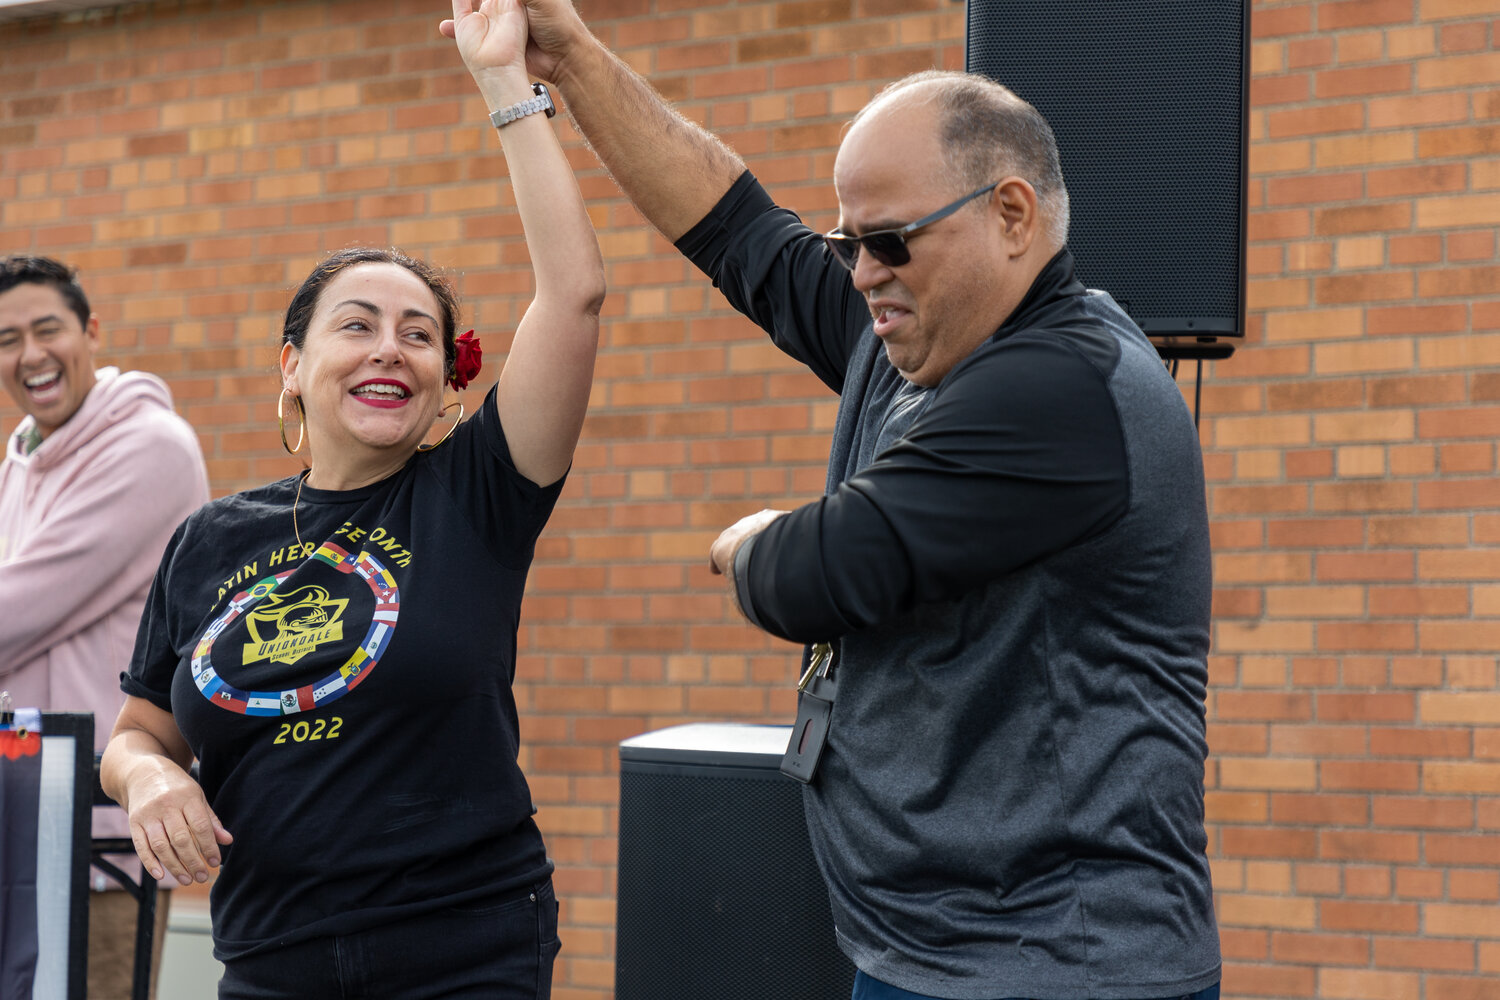 Dr. Estrella Olivares-Orellana, Uniondale’s director of multilingual learners, and Michael Ouellette, a bilingual social studies teacher, took part in the salsa lessons, and showed the youngsters how it’s done.